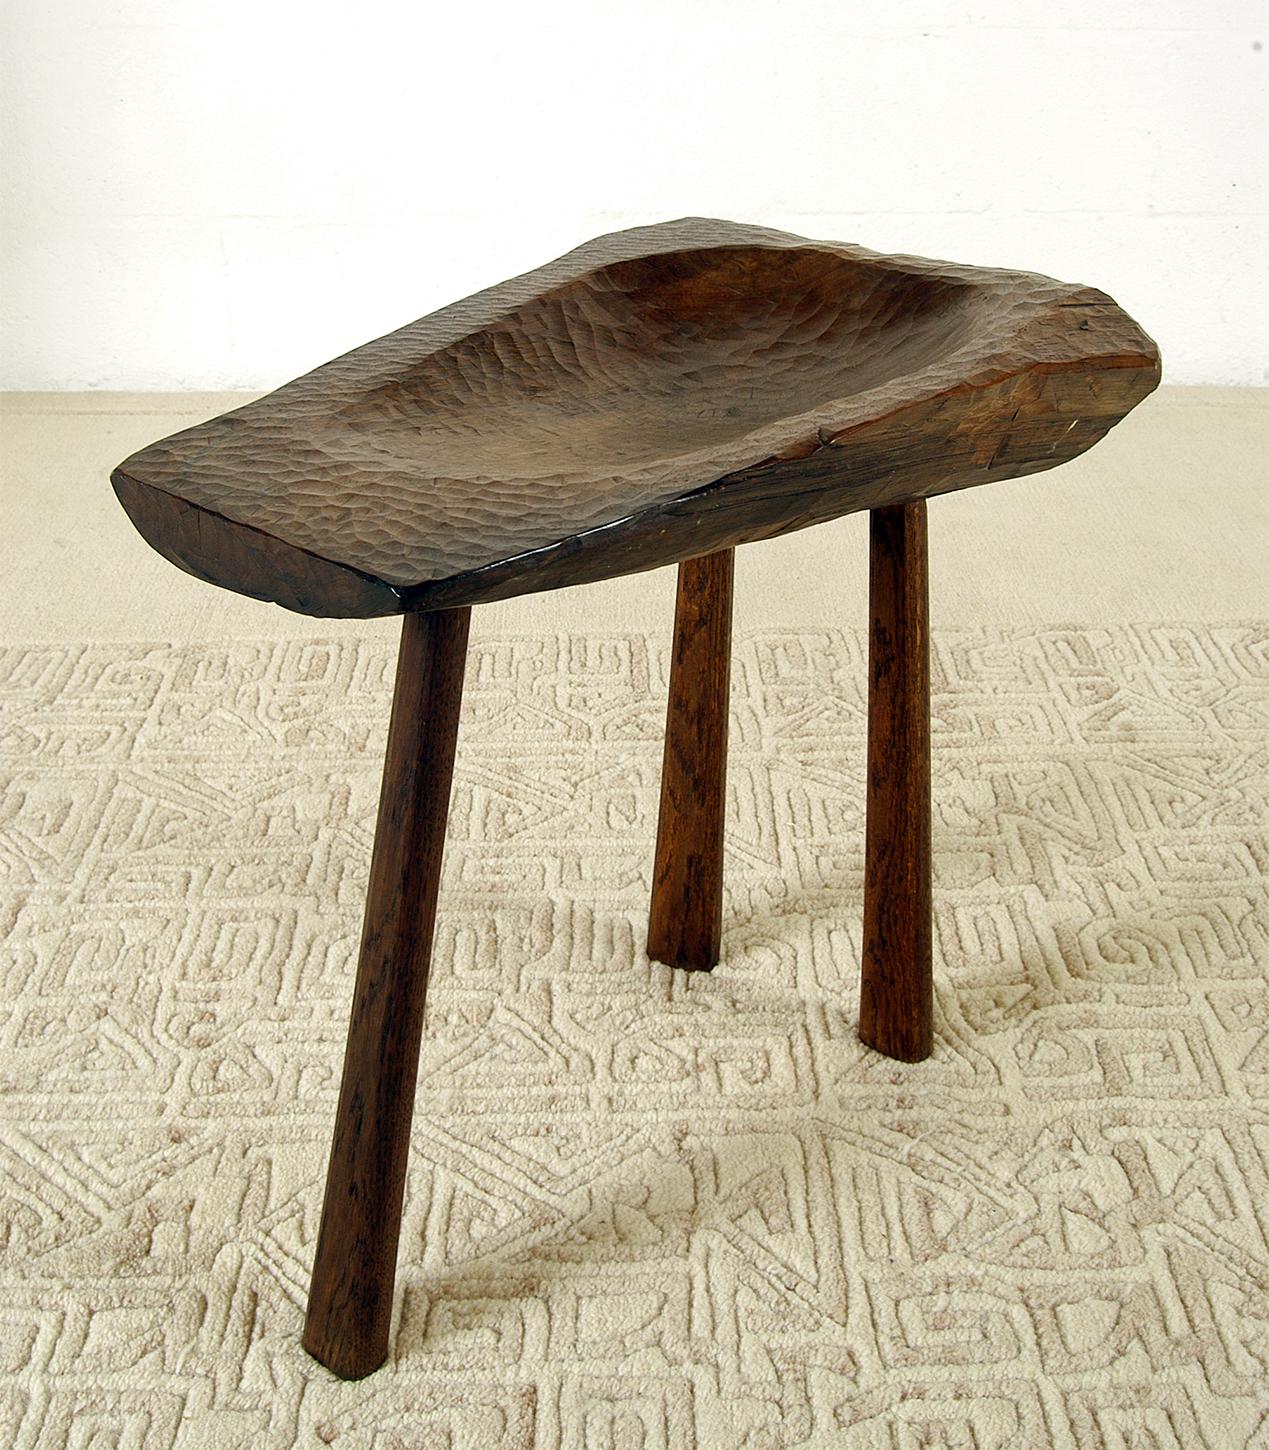 19c Folk Art Country Swedish Adze Carved Rosewood Tripod Table Bowl Decorative In Good Condition For Sale In Sherborne, Dorset